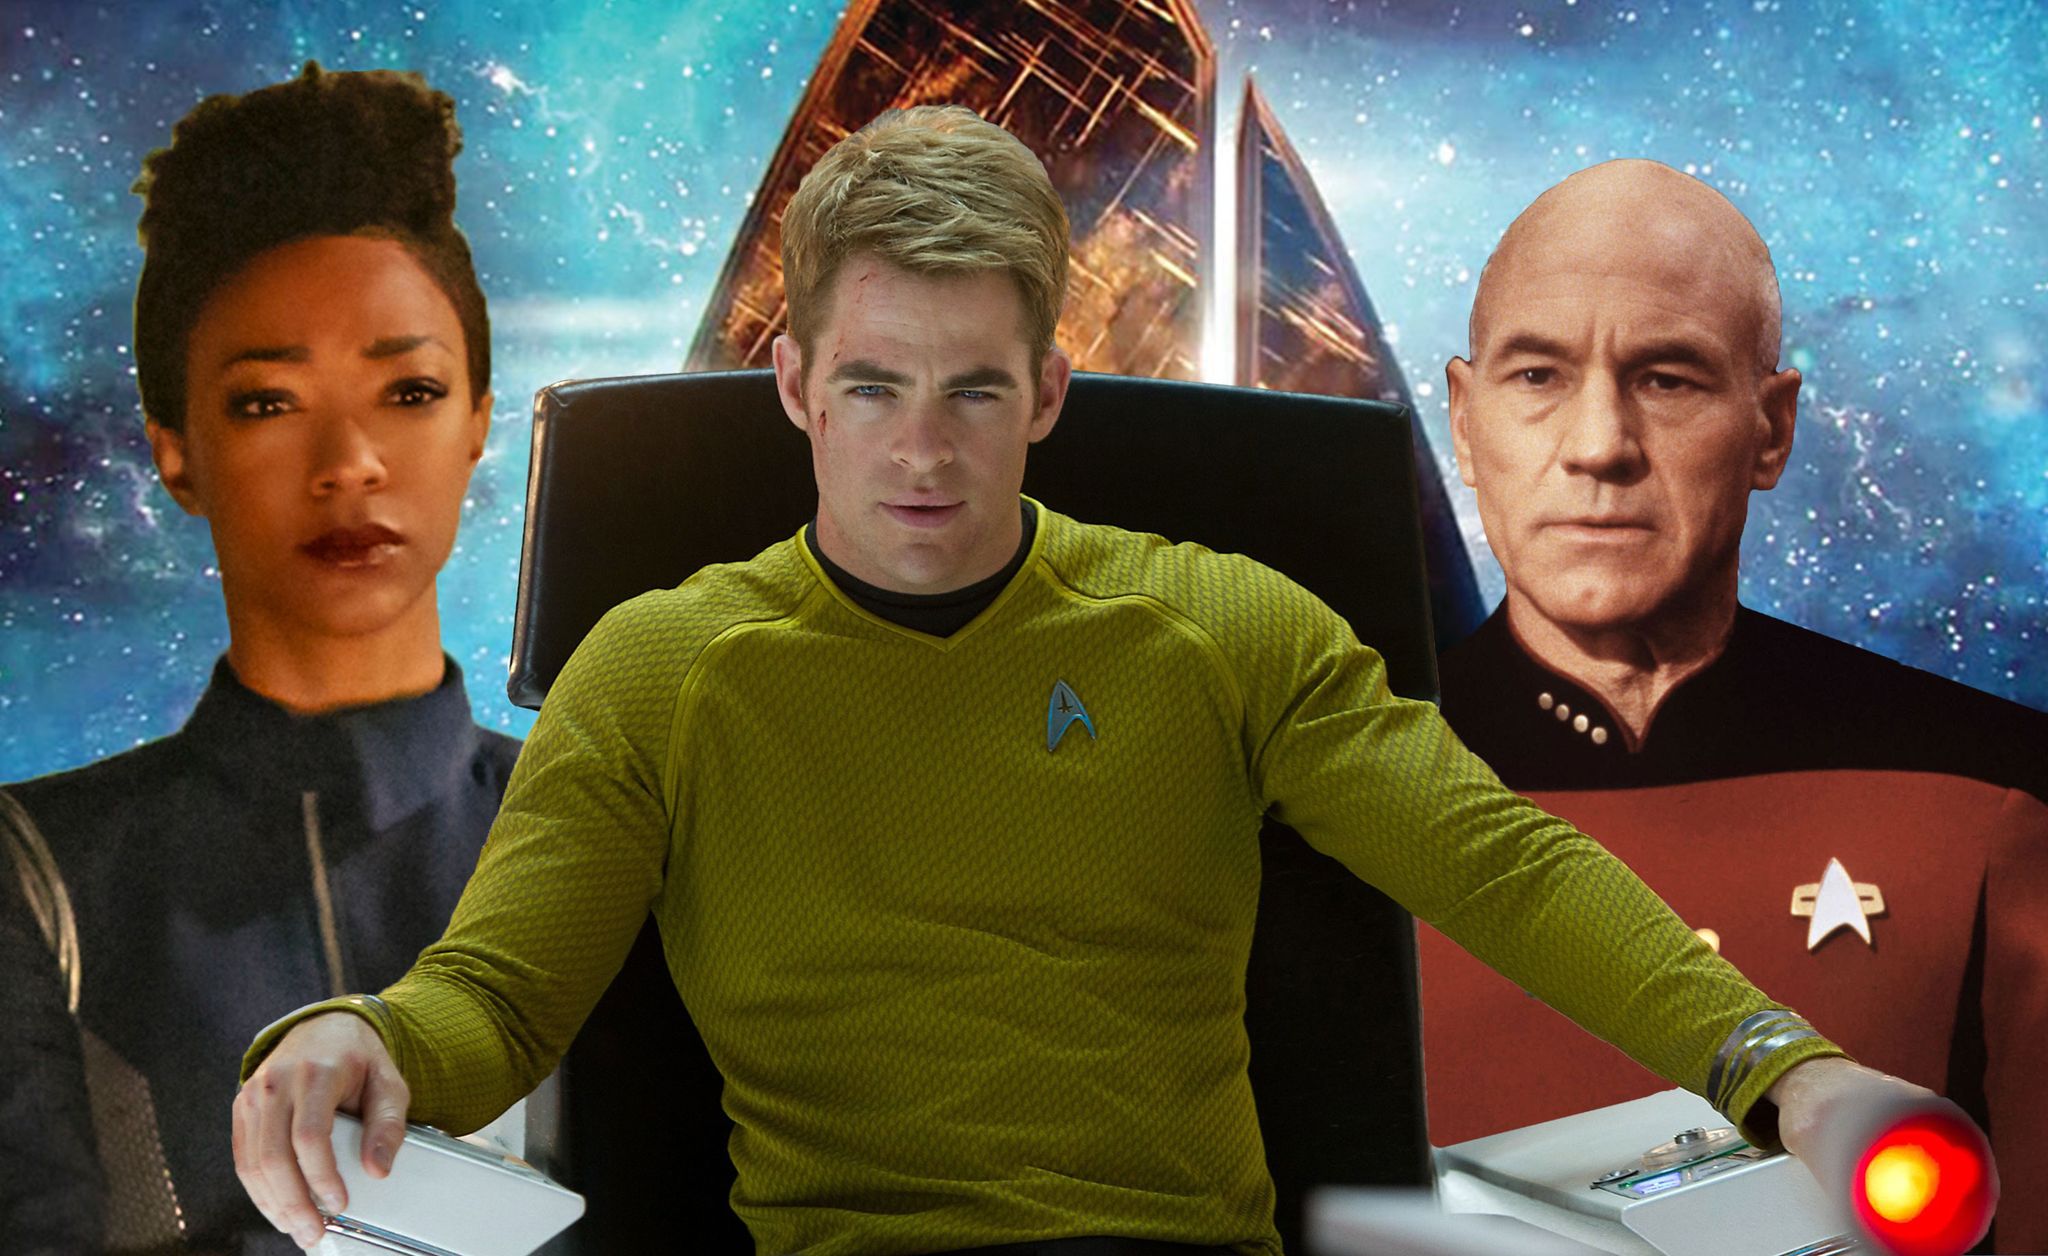 Star Trek franchise - TV shows and movies